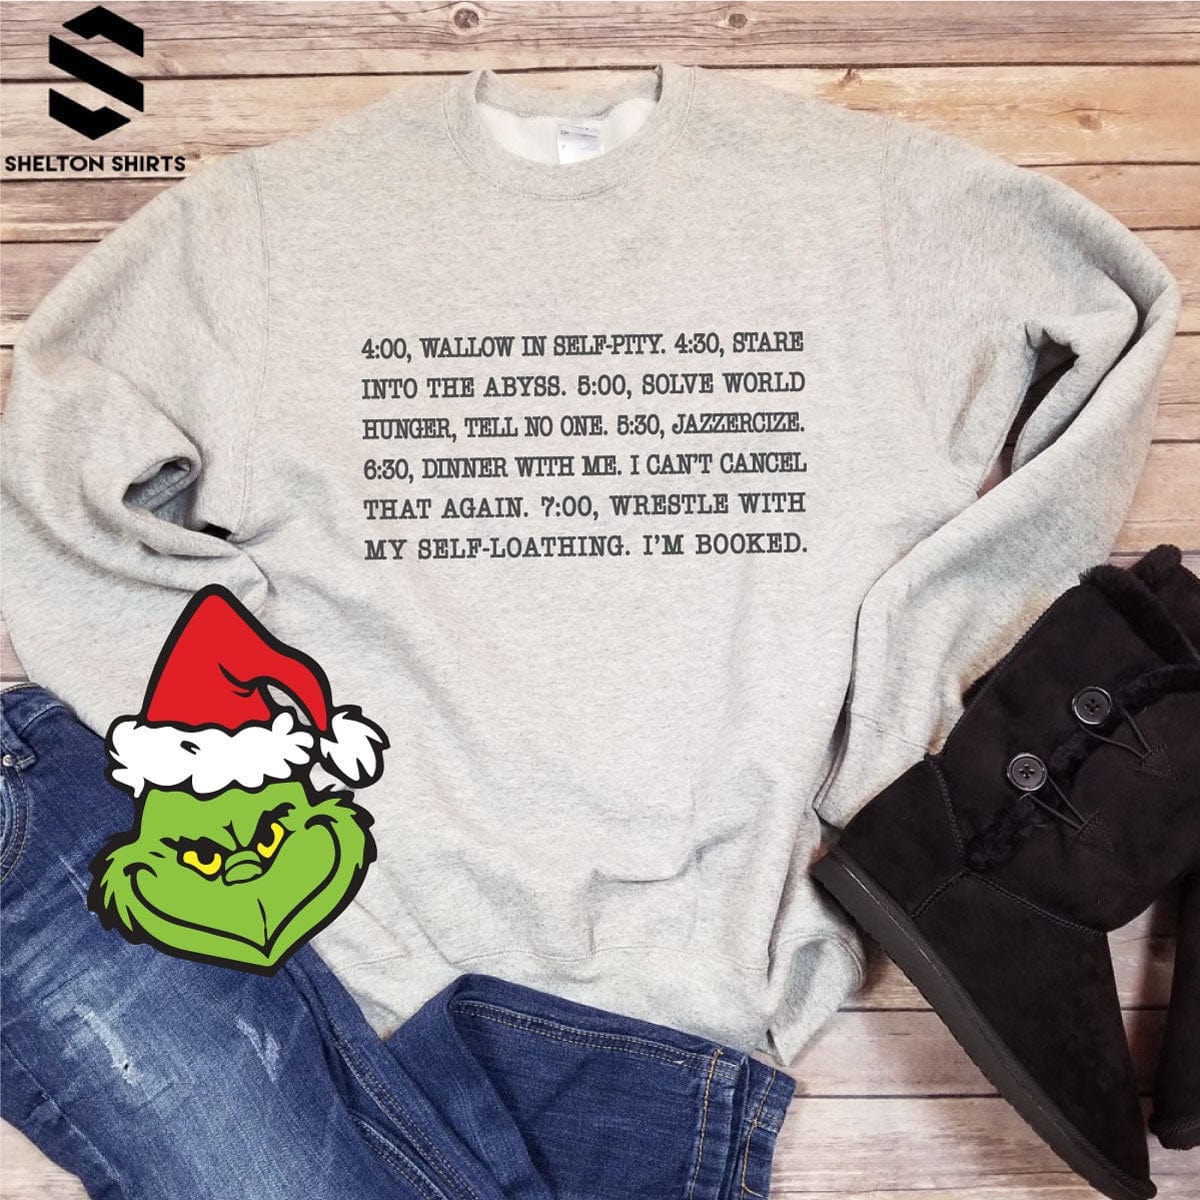 4:00 Wallow in Self Pity Daily Routine The Grinch Quote Crew Neck Sweatshirt